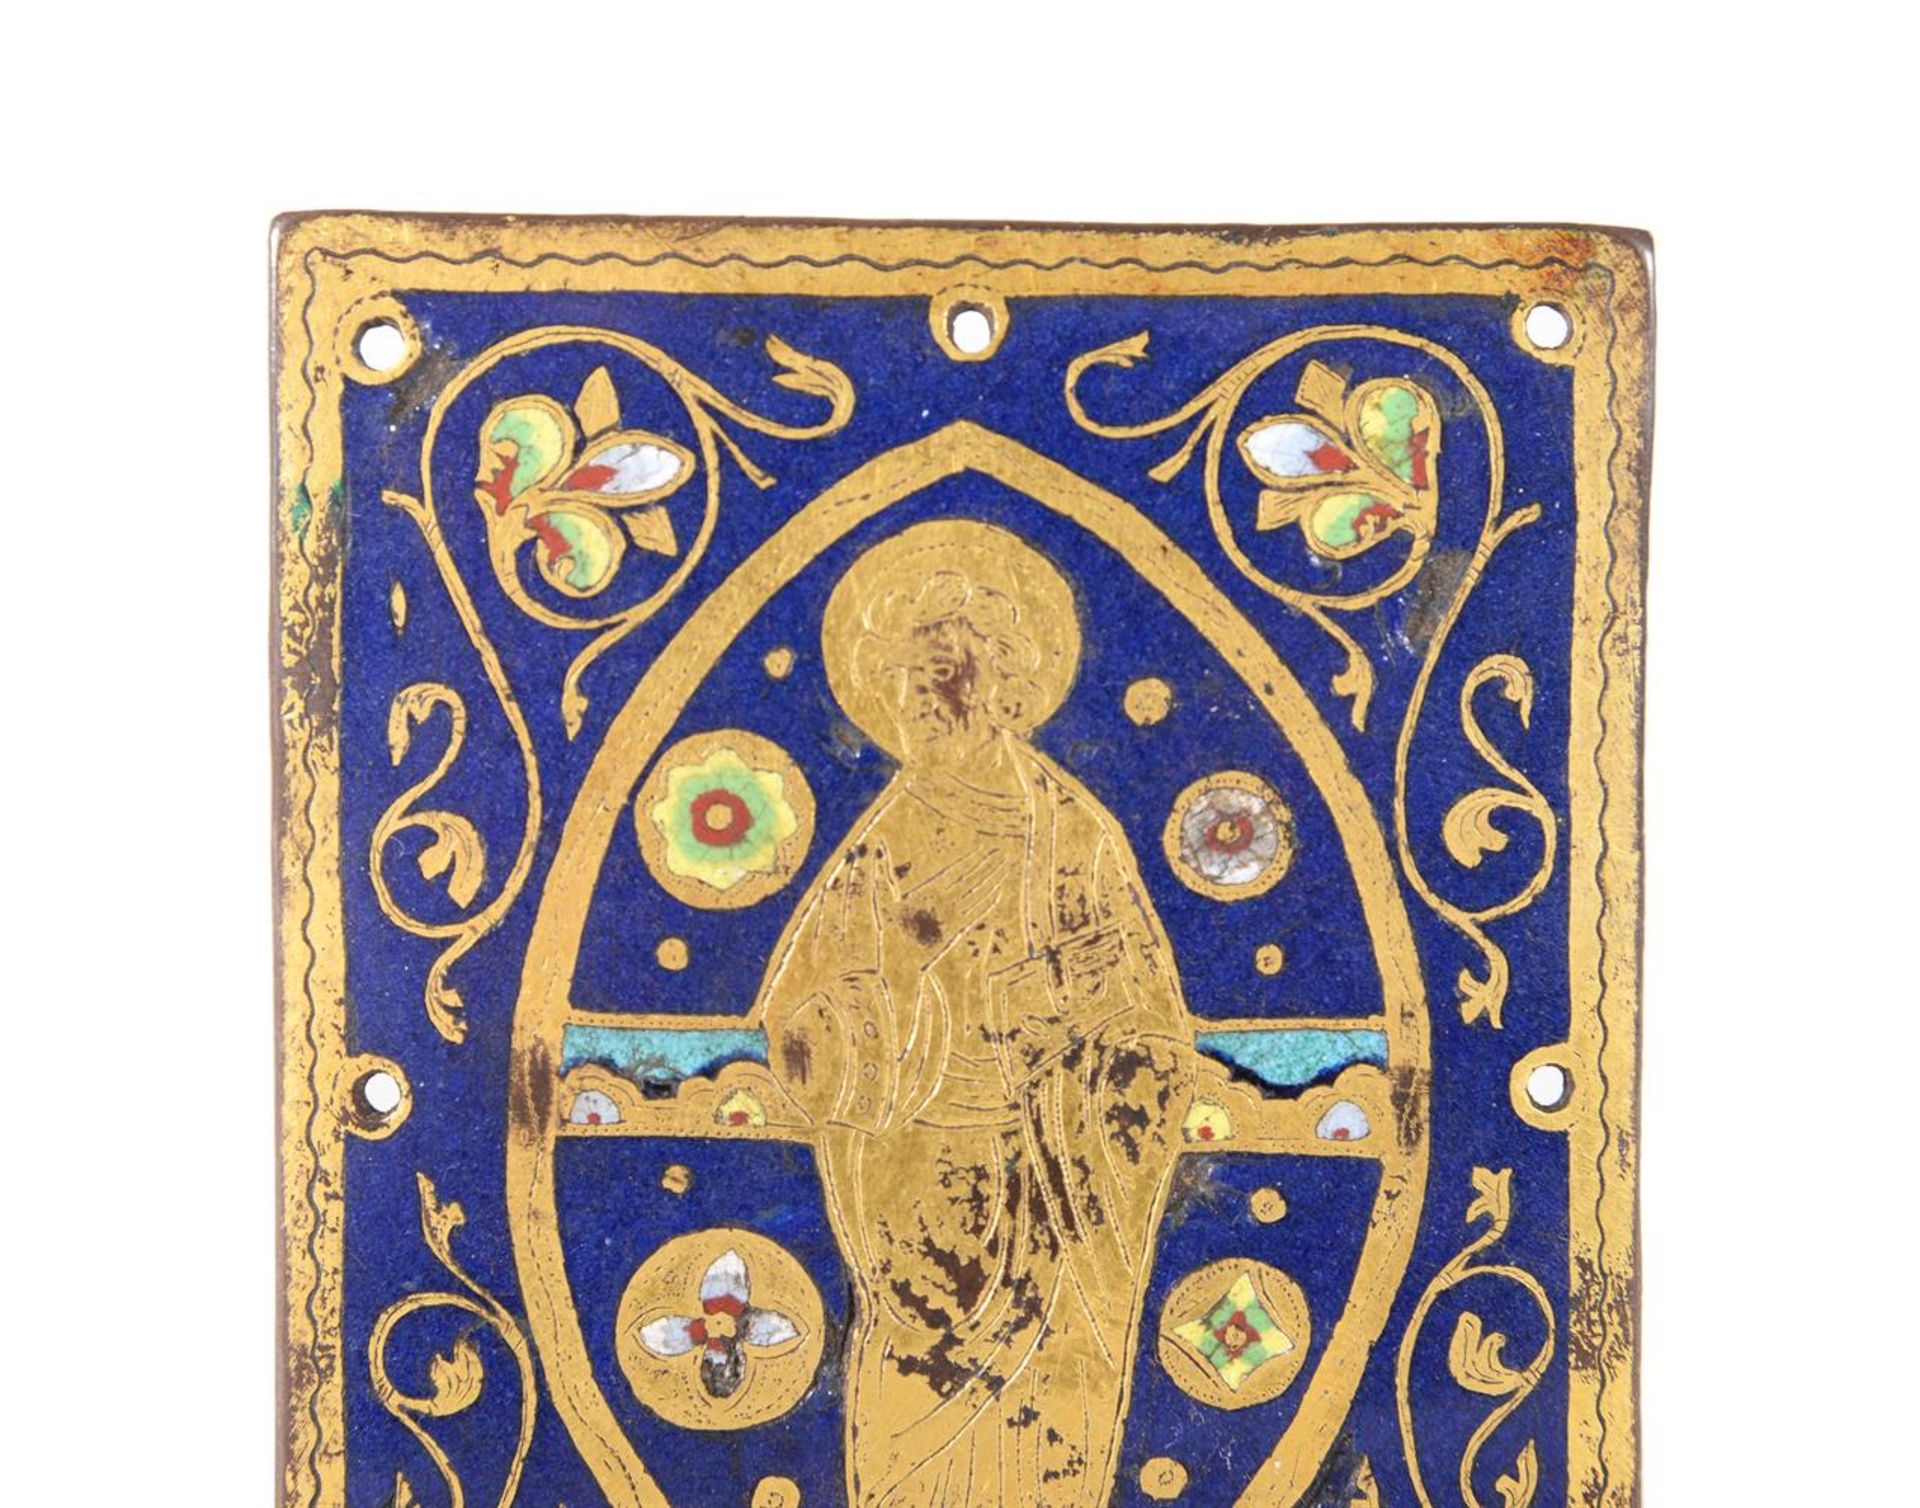 A SMALL LIMOGES COPPER-GILT AND ENAMELLED PANEL, POSSIBLY 13-14TH CENTURY - Image 2 of 4